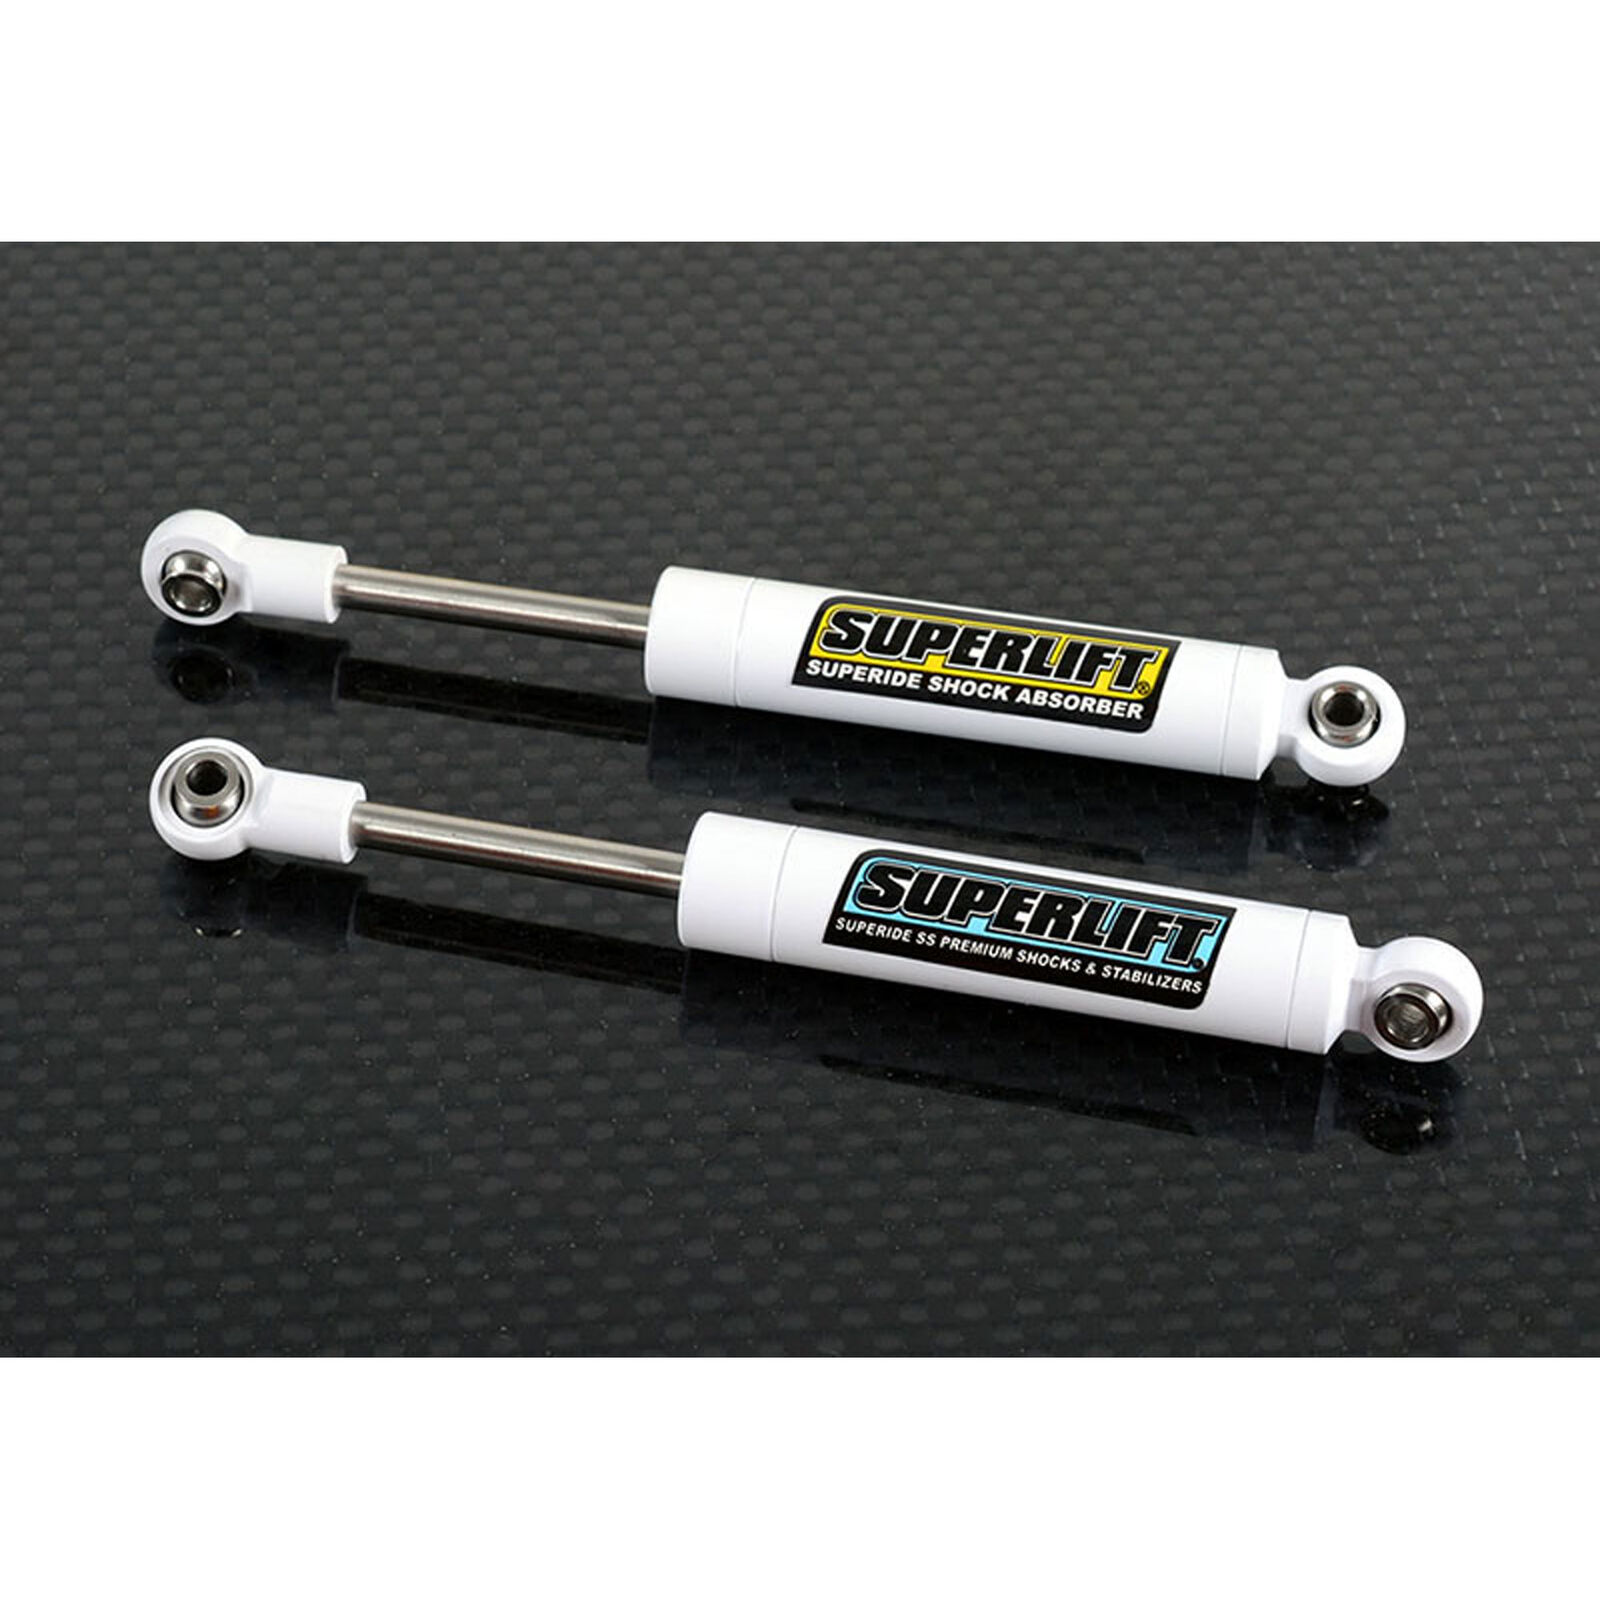 Superlift Superide 90mm Scale Shock Absorbers